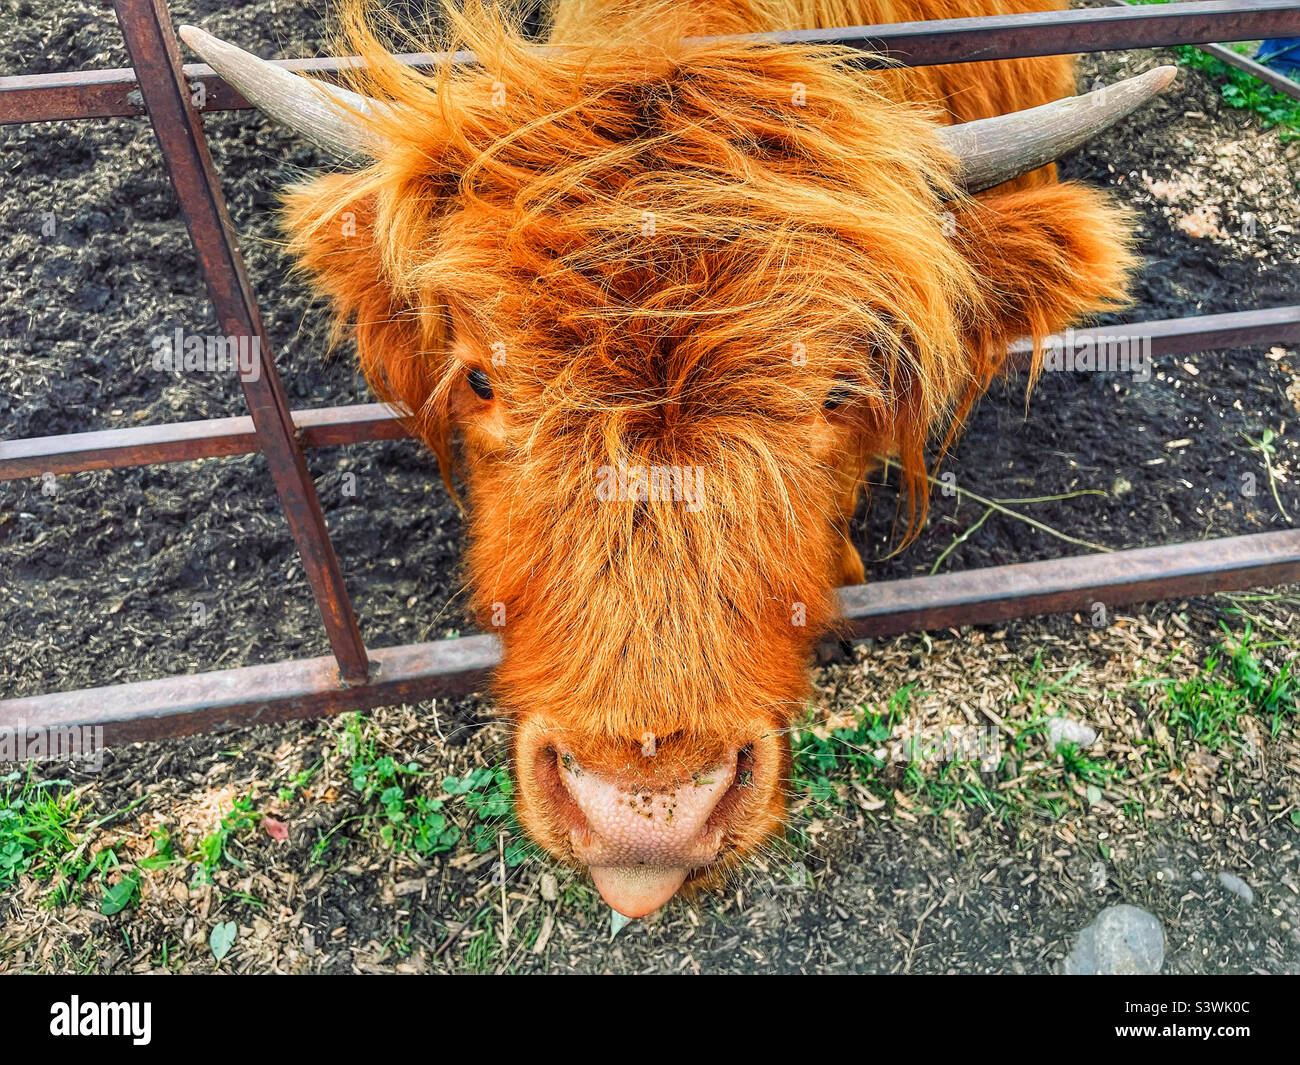 Orange long haired cow with tongue sticking out. Stock Photo